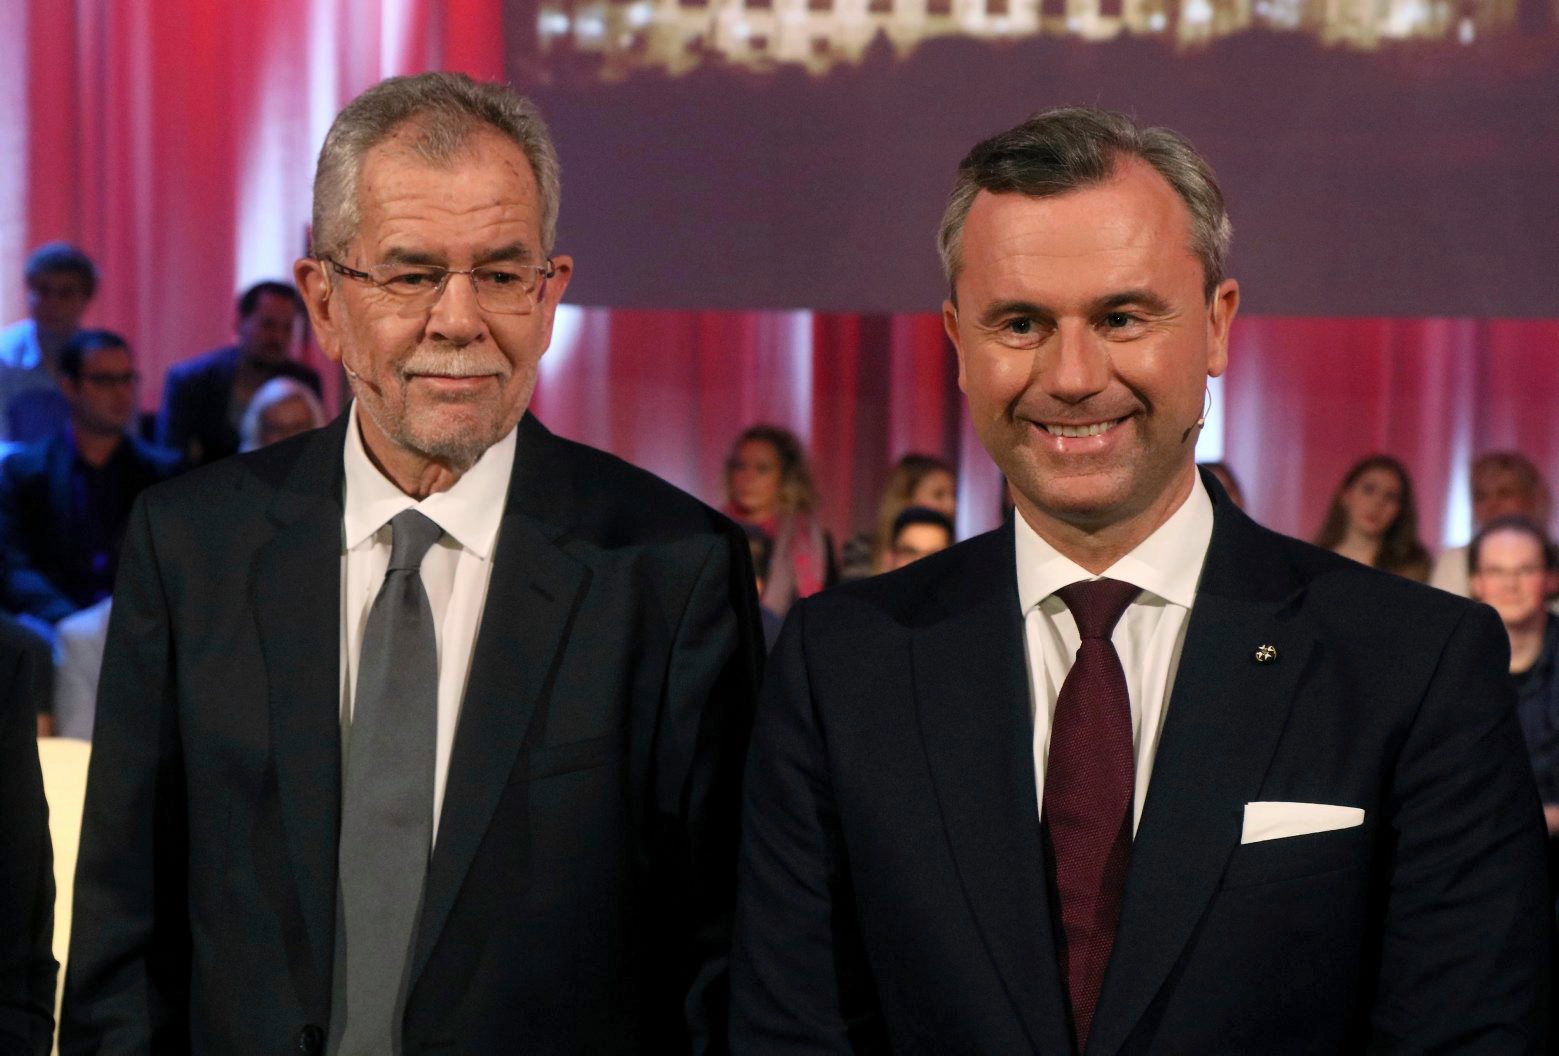 Alexander Van der Bellen, left, candidate for presidential elections of the Austrian Greens, and Norbert Hofer, candidate of Austria's right-wing Freedom Party, FPOE, wait for the start of a TV debate in Vienna, Austria, Sunday, Nov. 20, 2016. (AP Photo/Ronald Zak) Austria Election